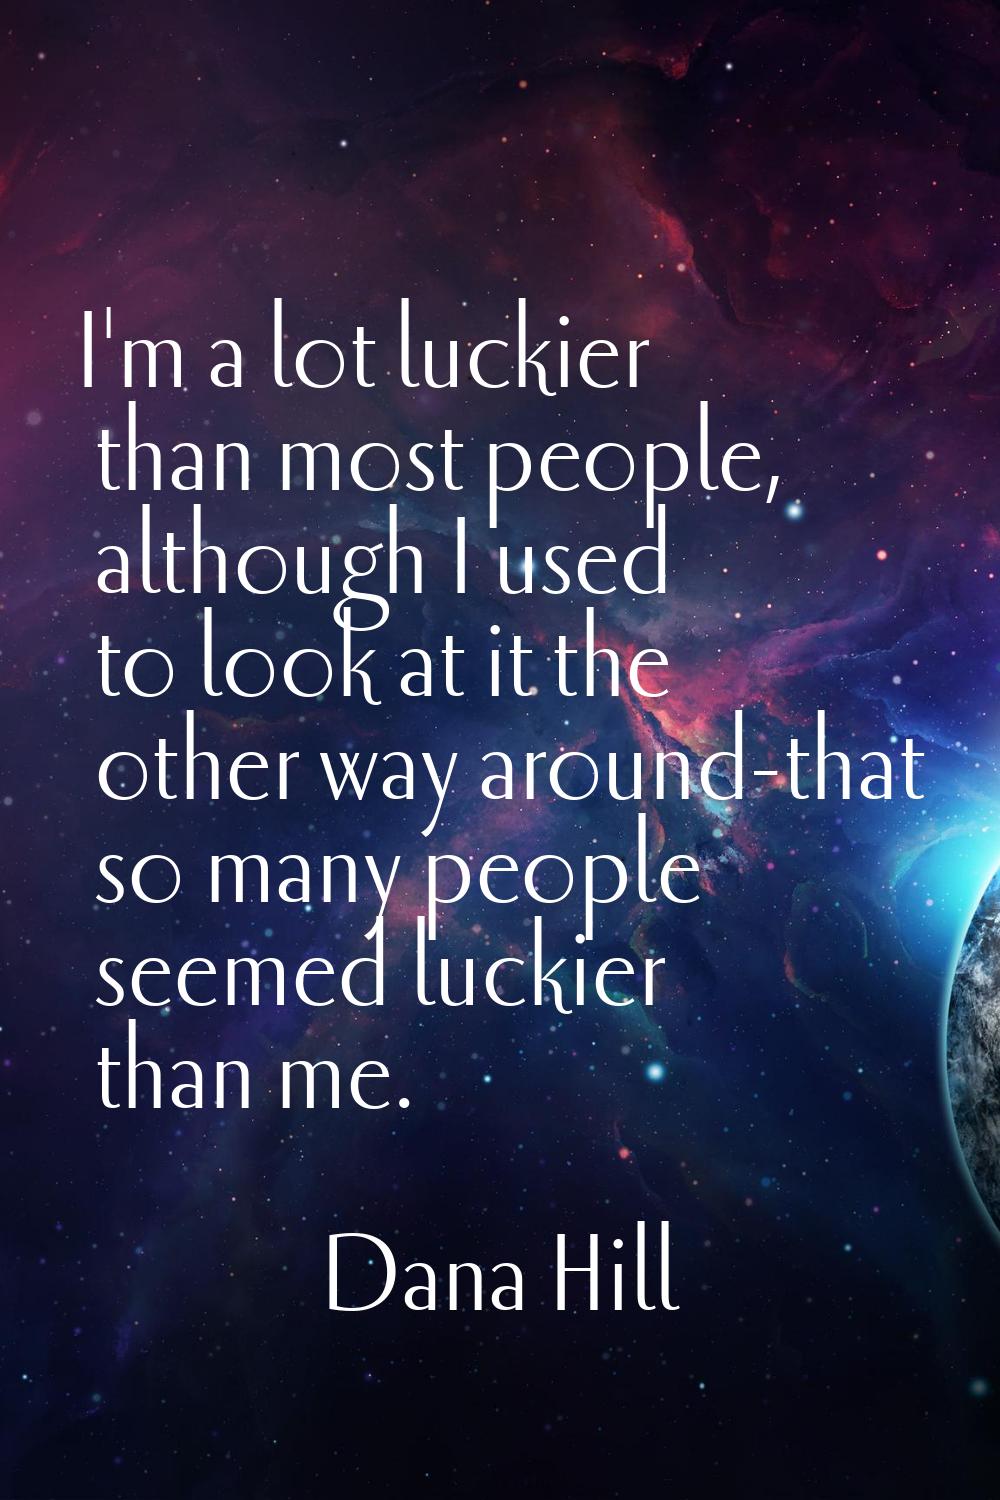 I'm a lot luckier than most people, although I used to look at it the other way around-that so many